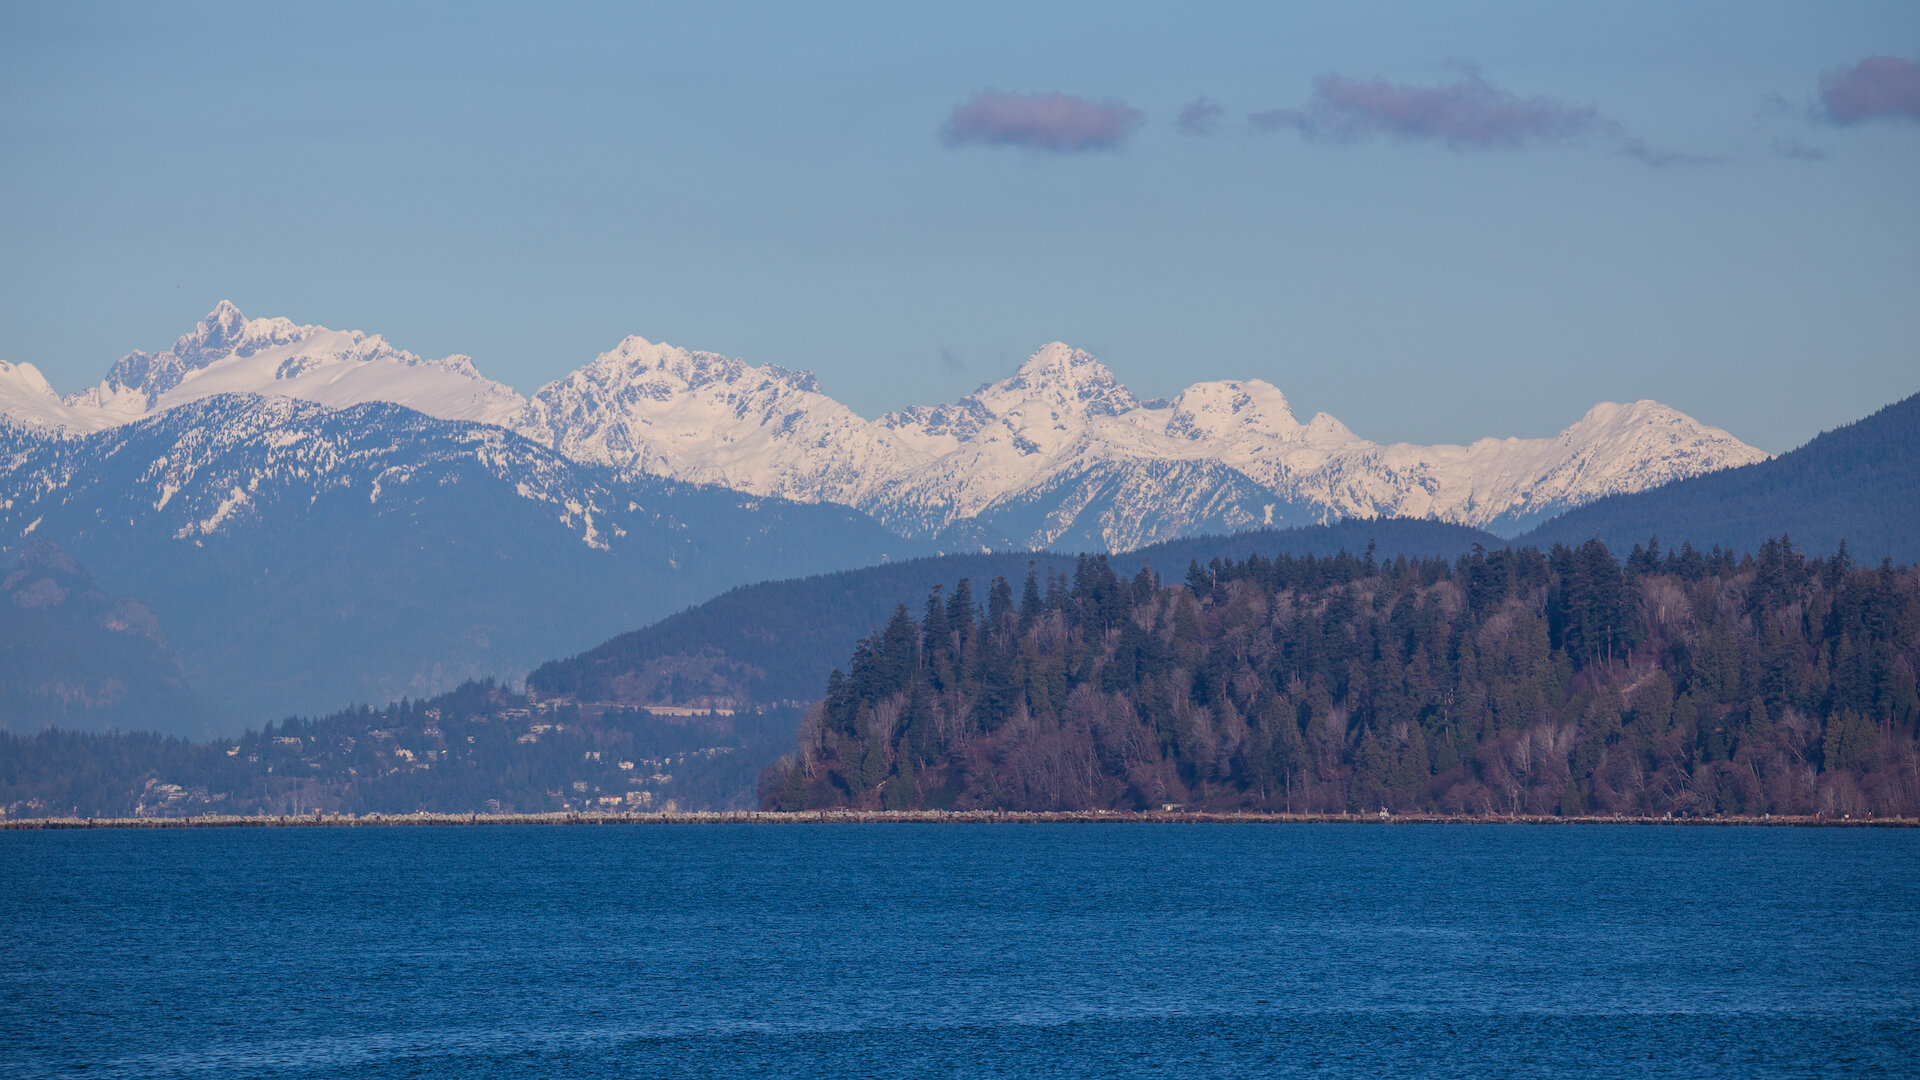 Stanley Park and the mountains in the distance